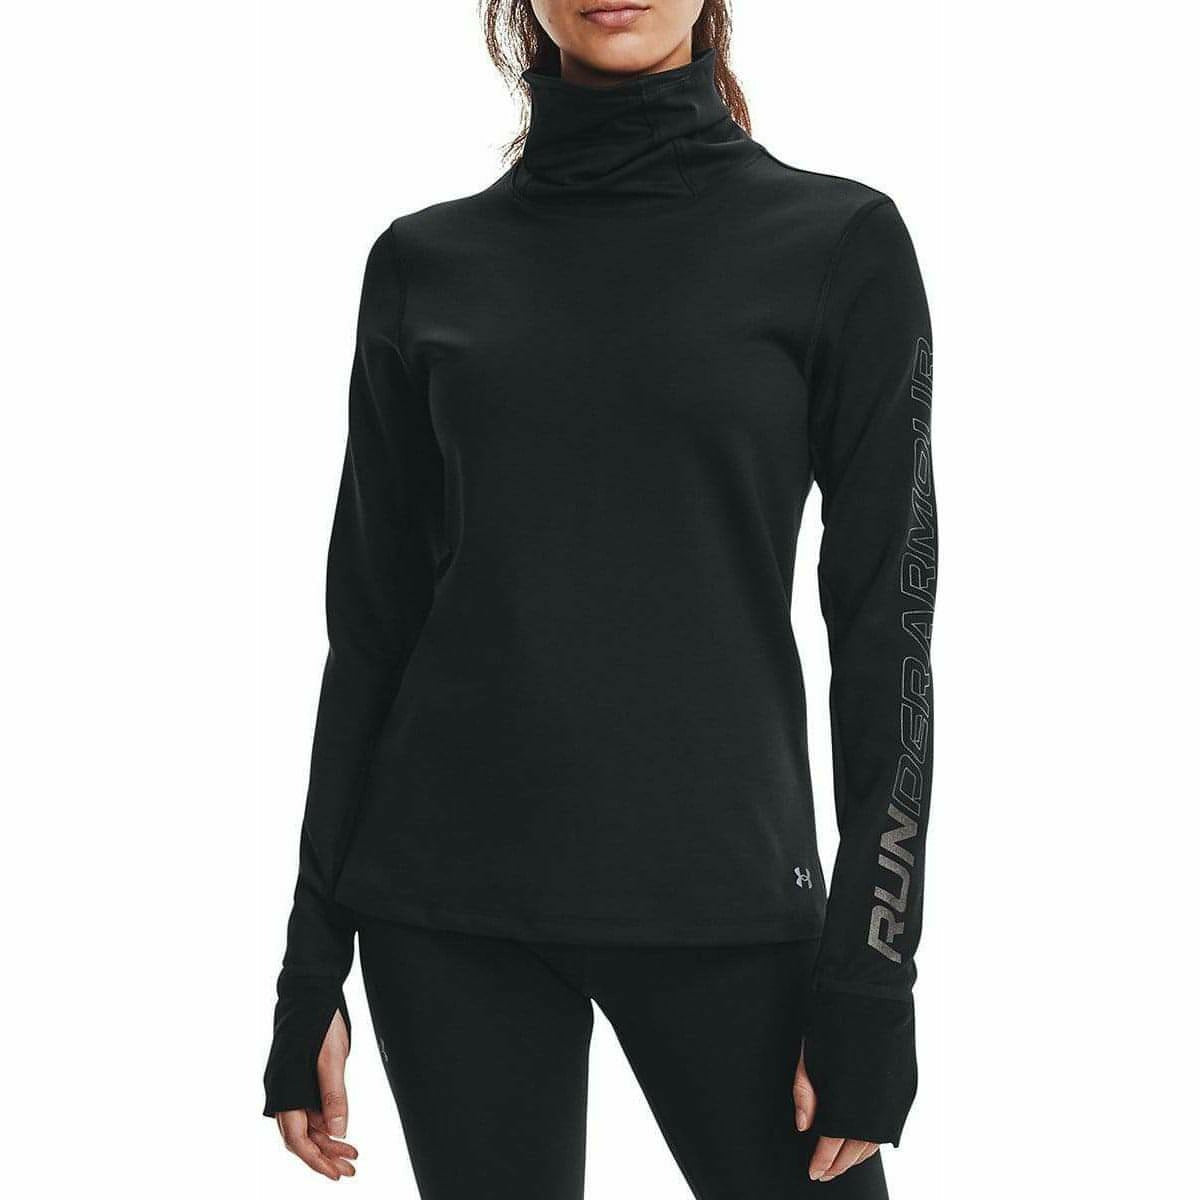 Under Armour Empowered Funnel Neck Long Sleeve Womens Running Top - Black